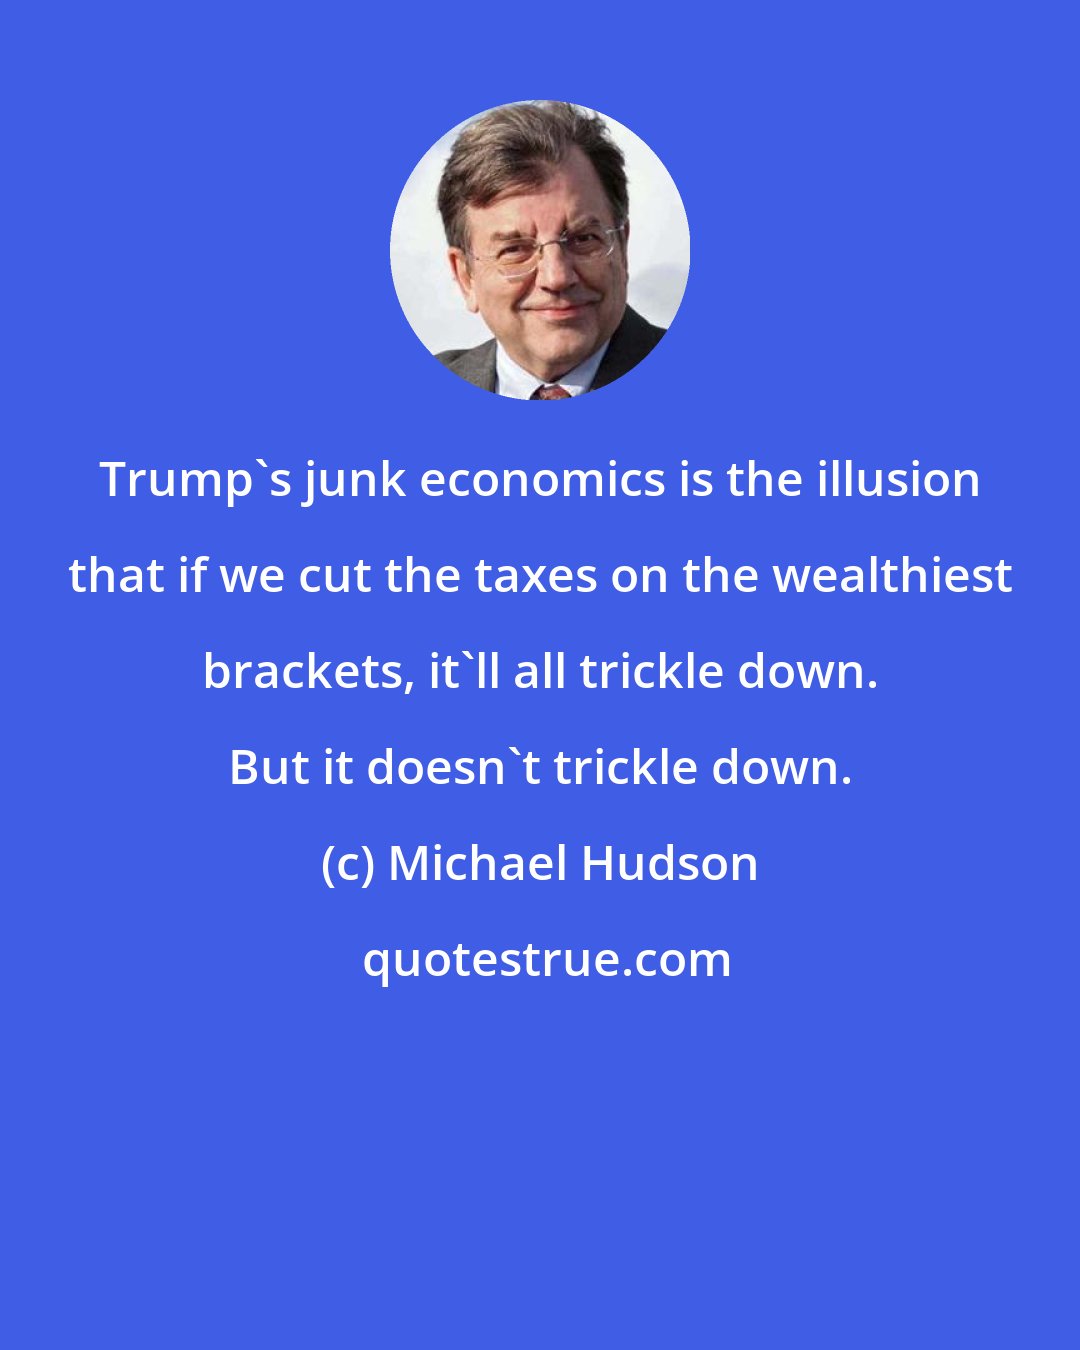 Michael Hudson: Trump's junk economics is the illusion that if we cut the taxes on the wealthiest brackets, it'll all trickle down. But it doesn't trickle down.